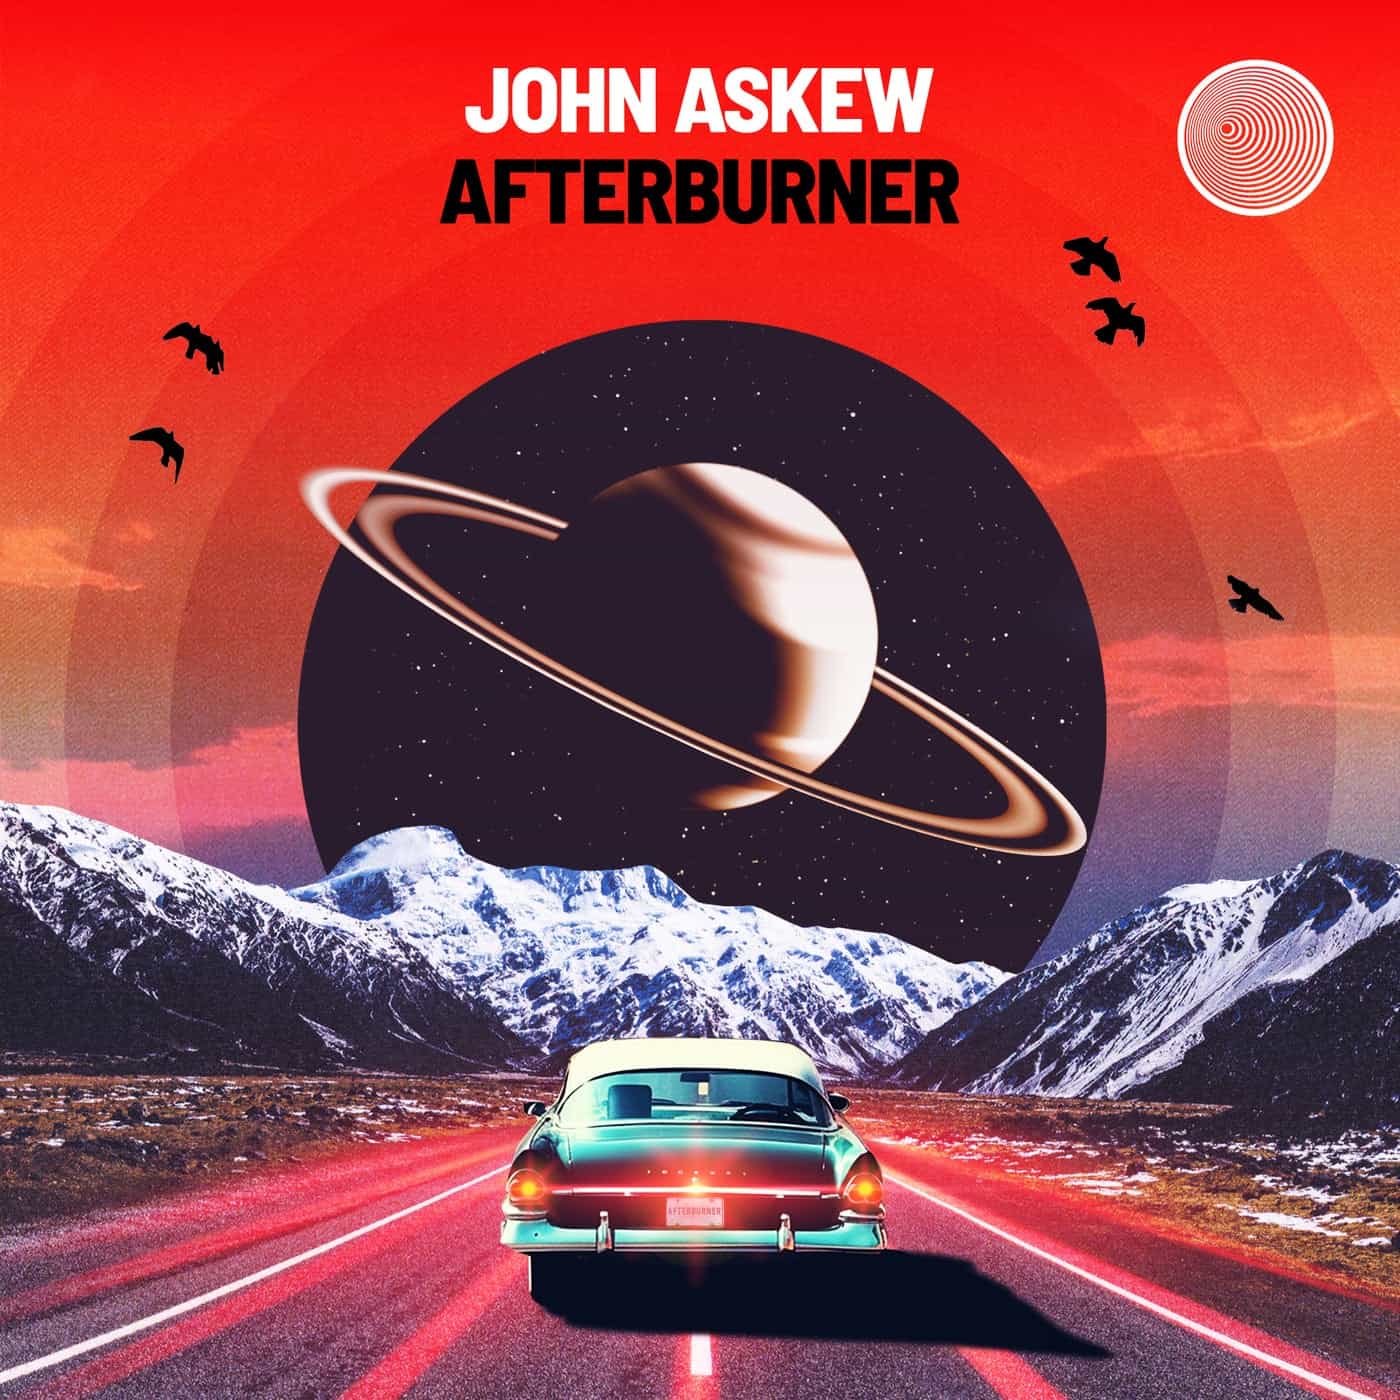 image cover: Afterburner by John Askew on Deep In Thought